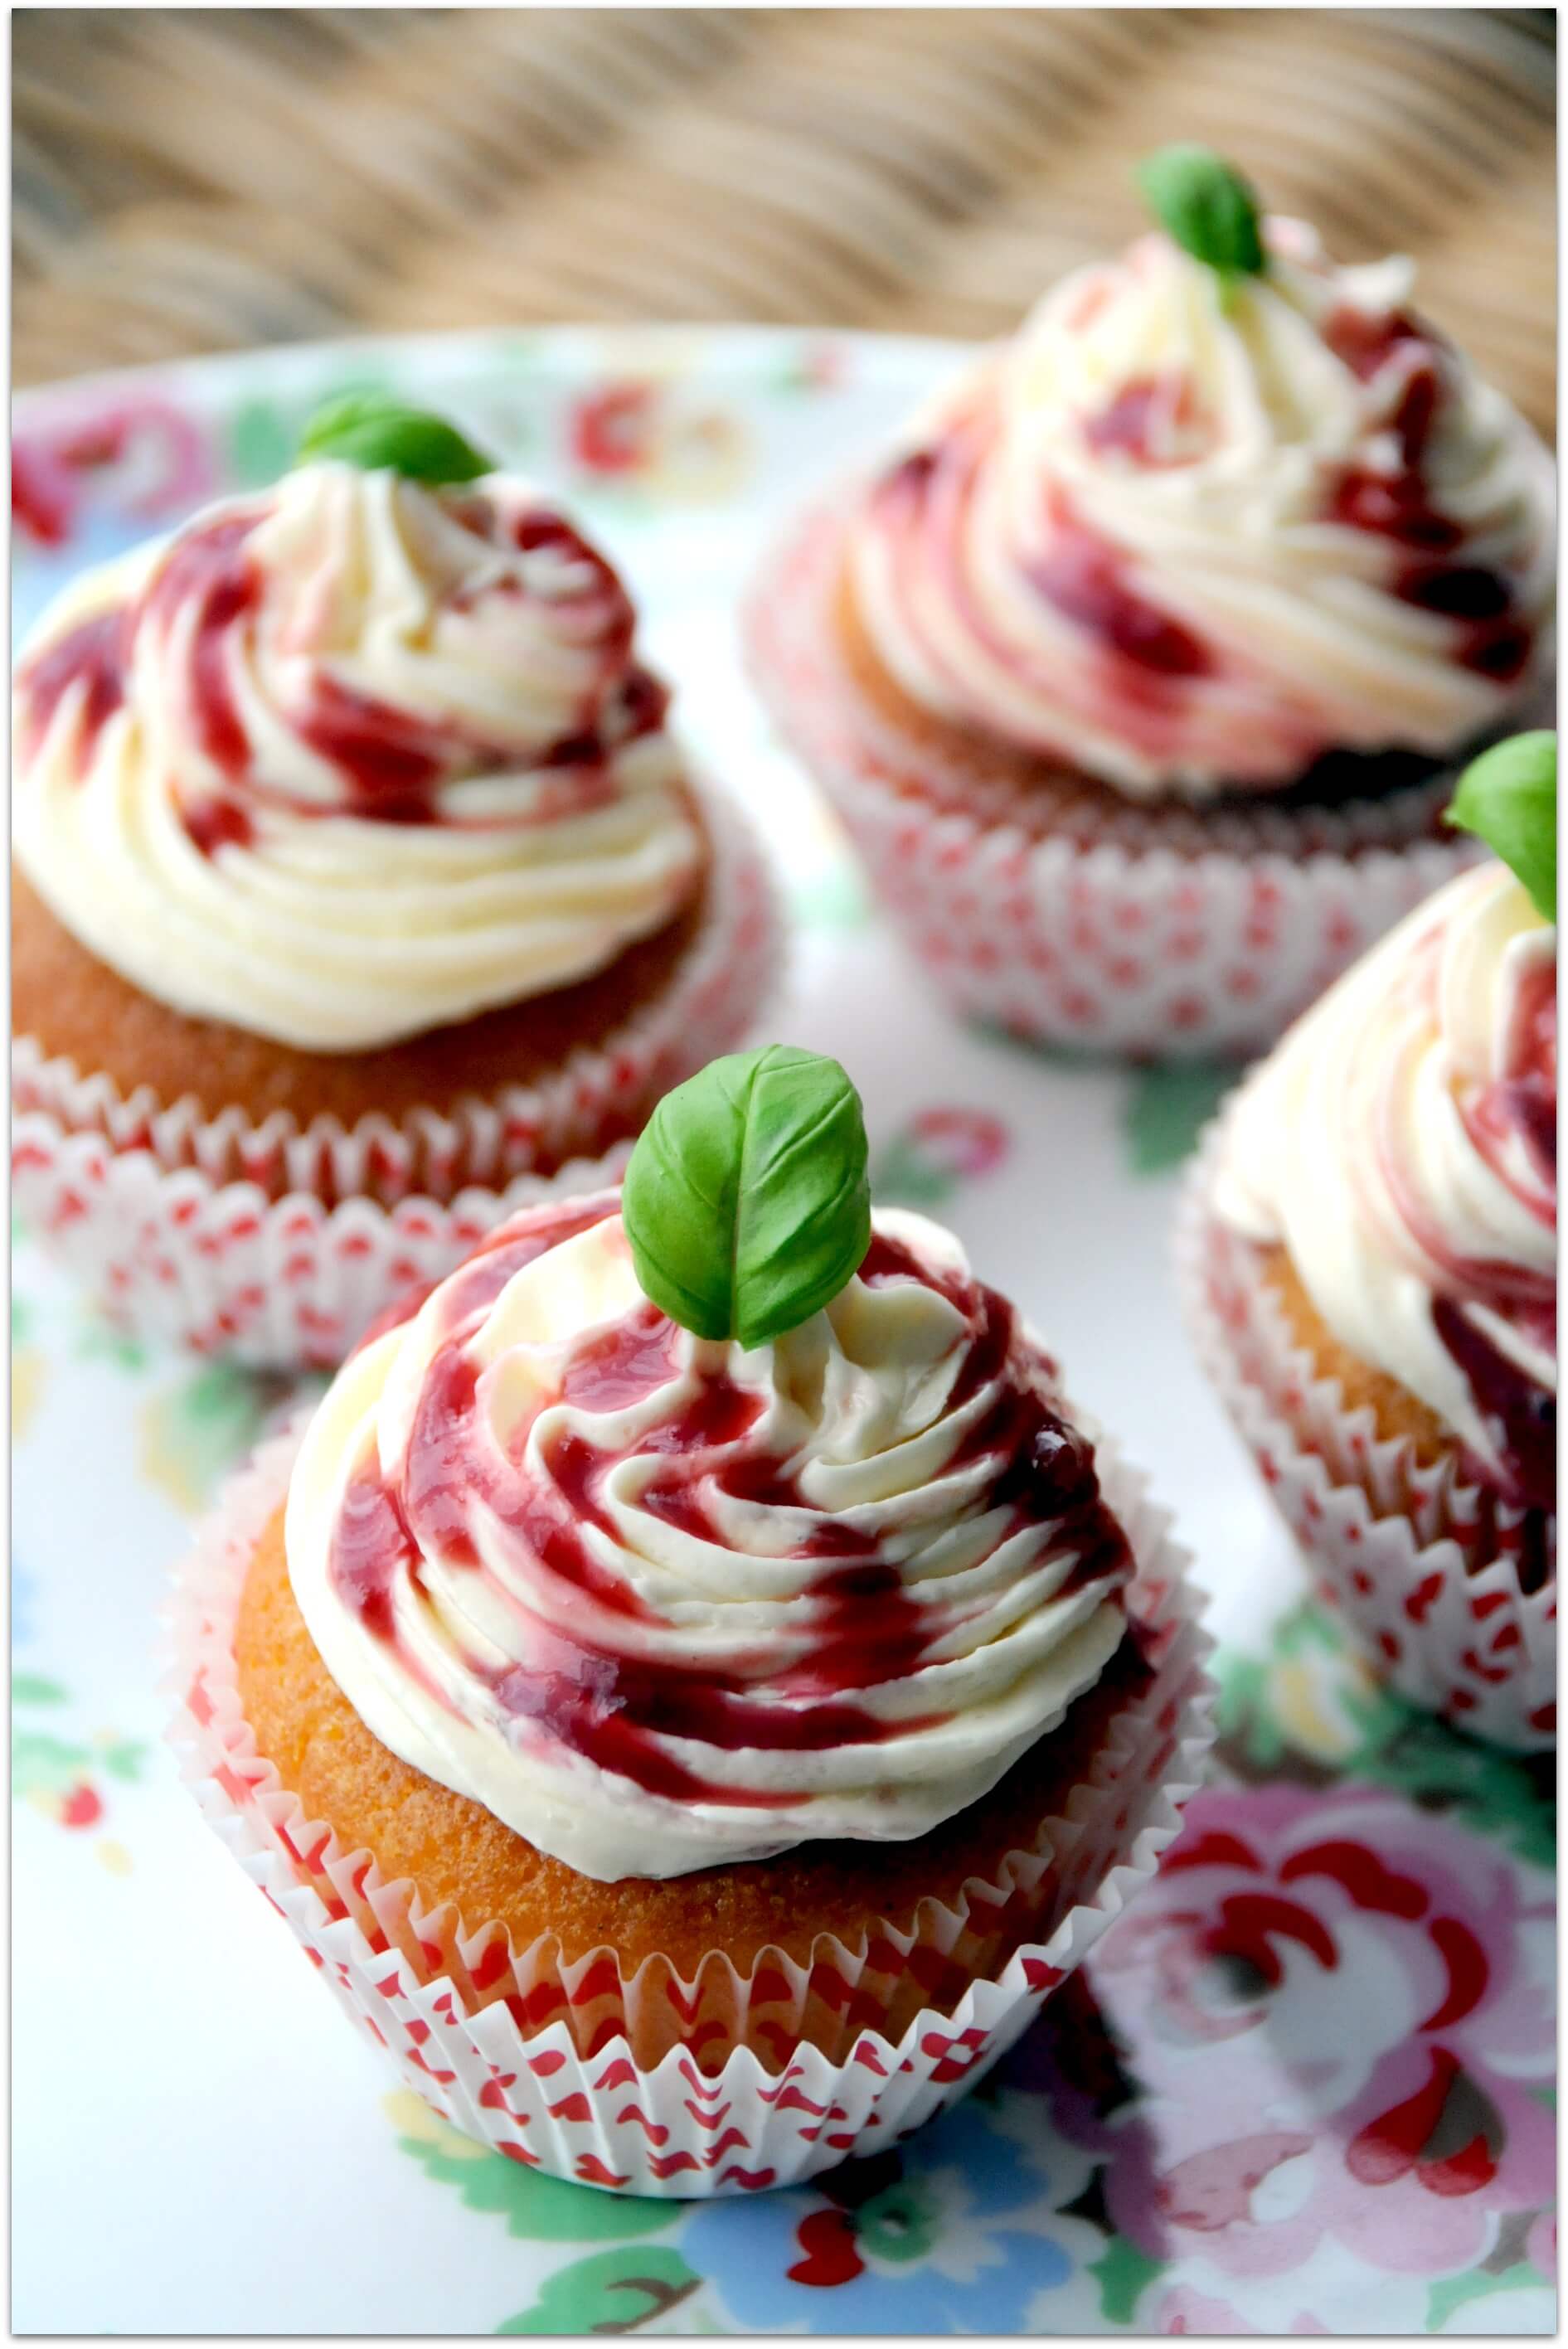 RASPBERRY RIPPLE AND BASIL CUPCAKES by Ren Behan